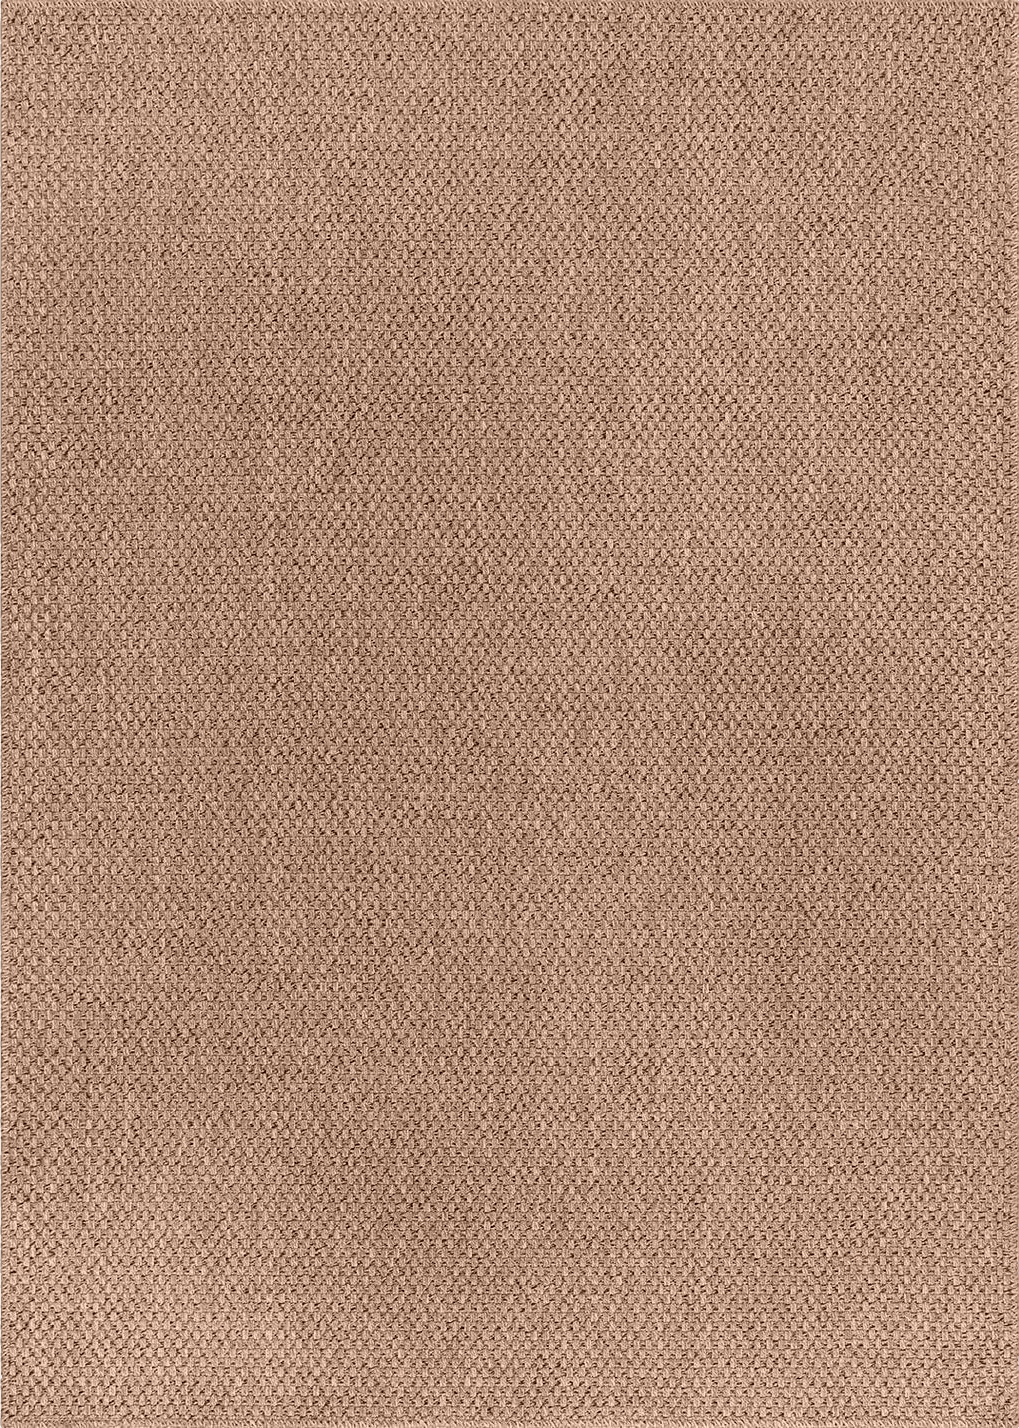 CAMILSON Easy Jute Rug 8x10, Indoor Outdoor Natural Color Farmhouse Area Rugs for Living Room Patio and Kitchen Rug, Solid Boho Woven Design, Easy-Cleaning, Non Slip Washable Outside Carpet (8 x 10)